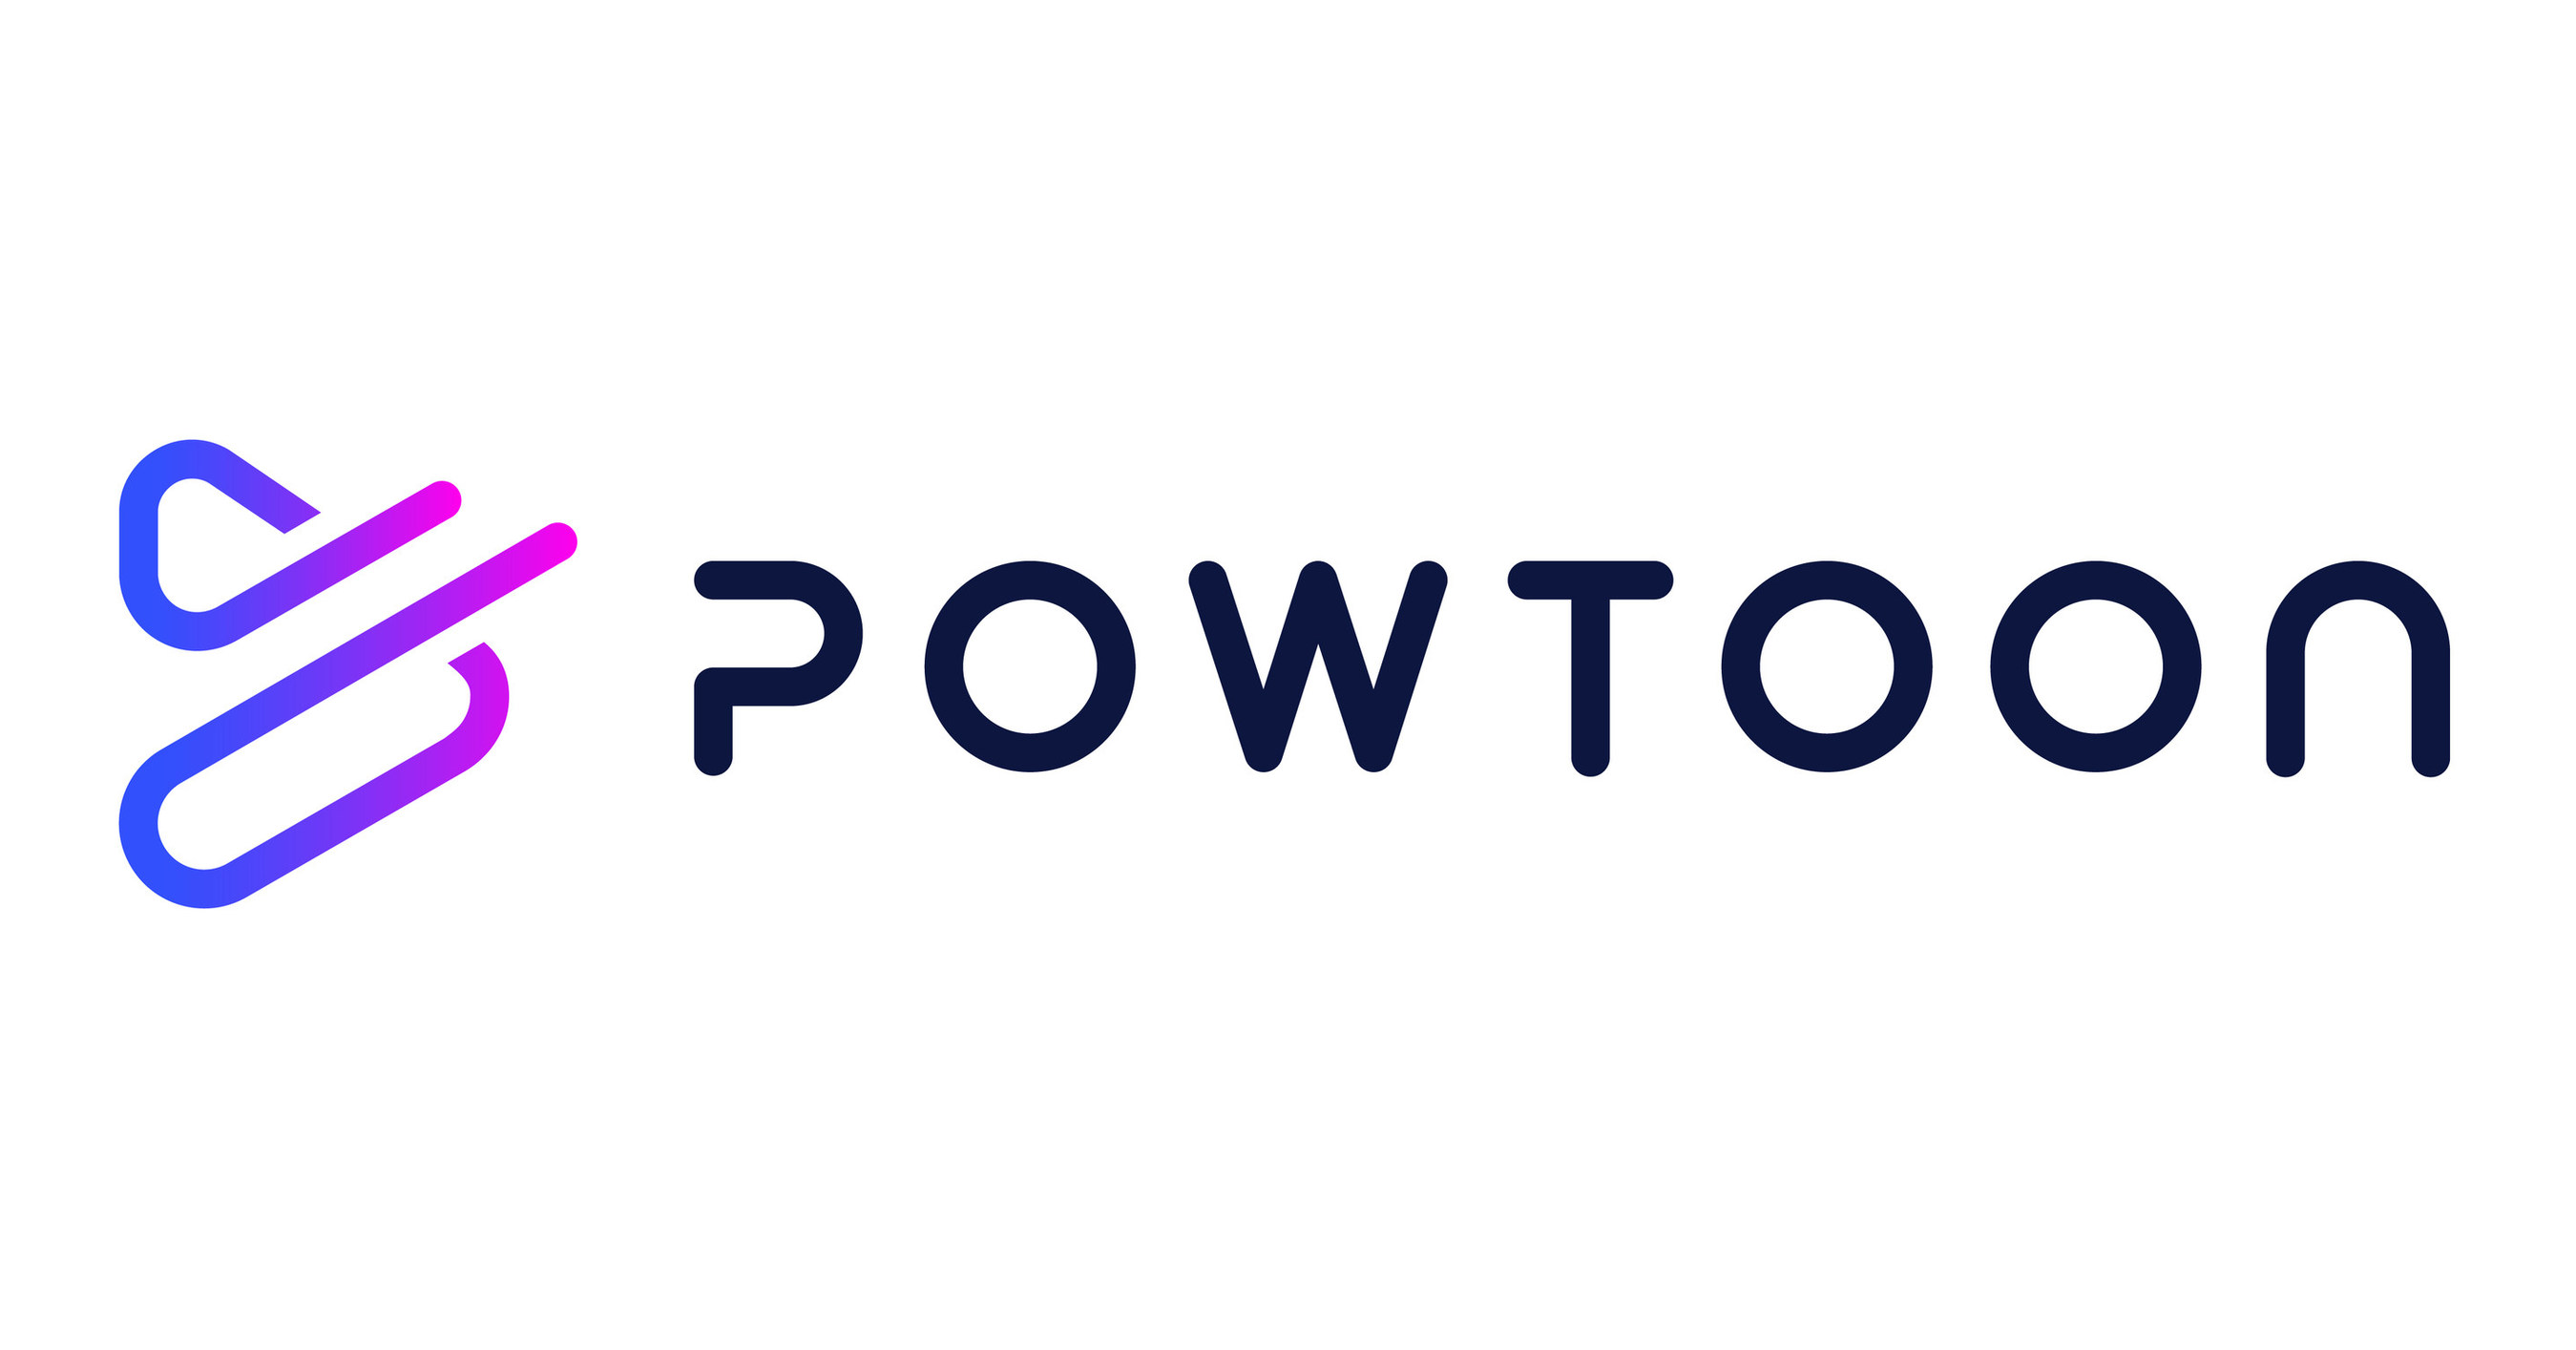 Powtoon Rolls Out New Tools to Assist in Remote Work and Education